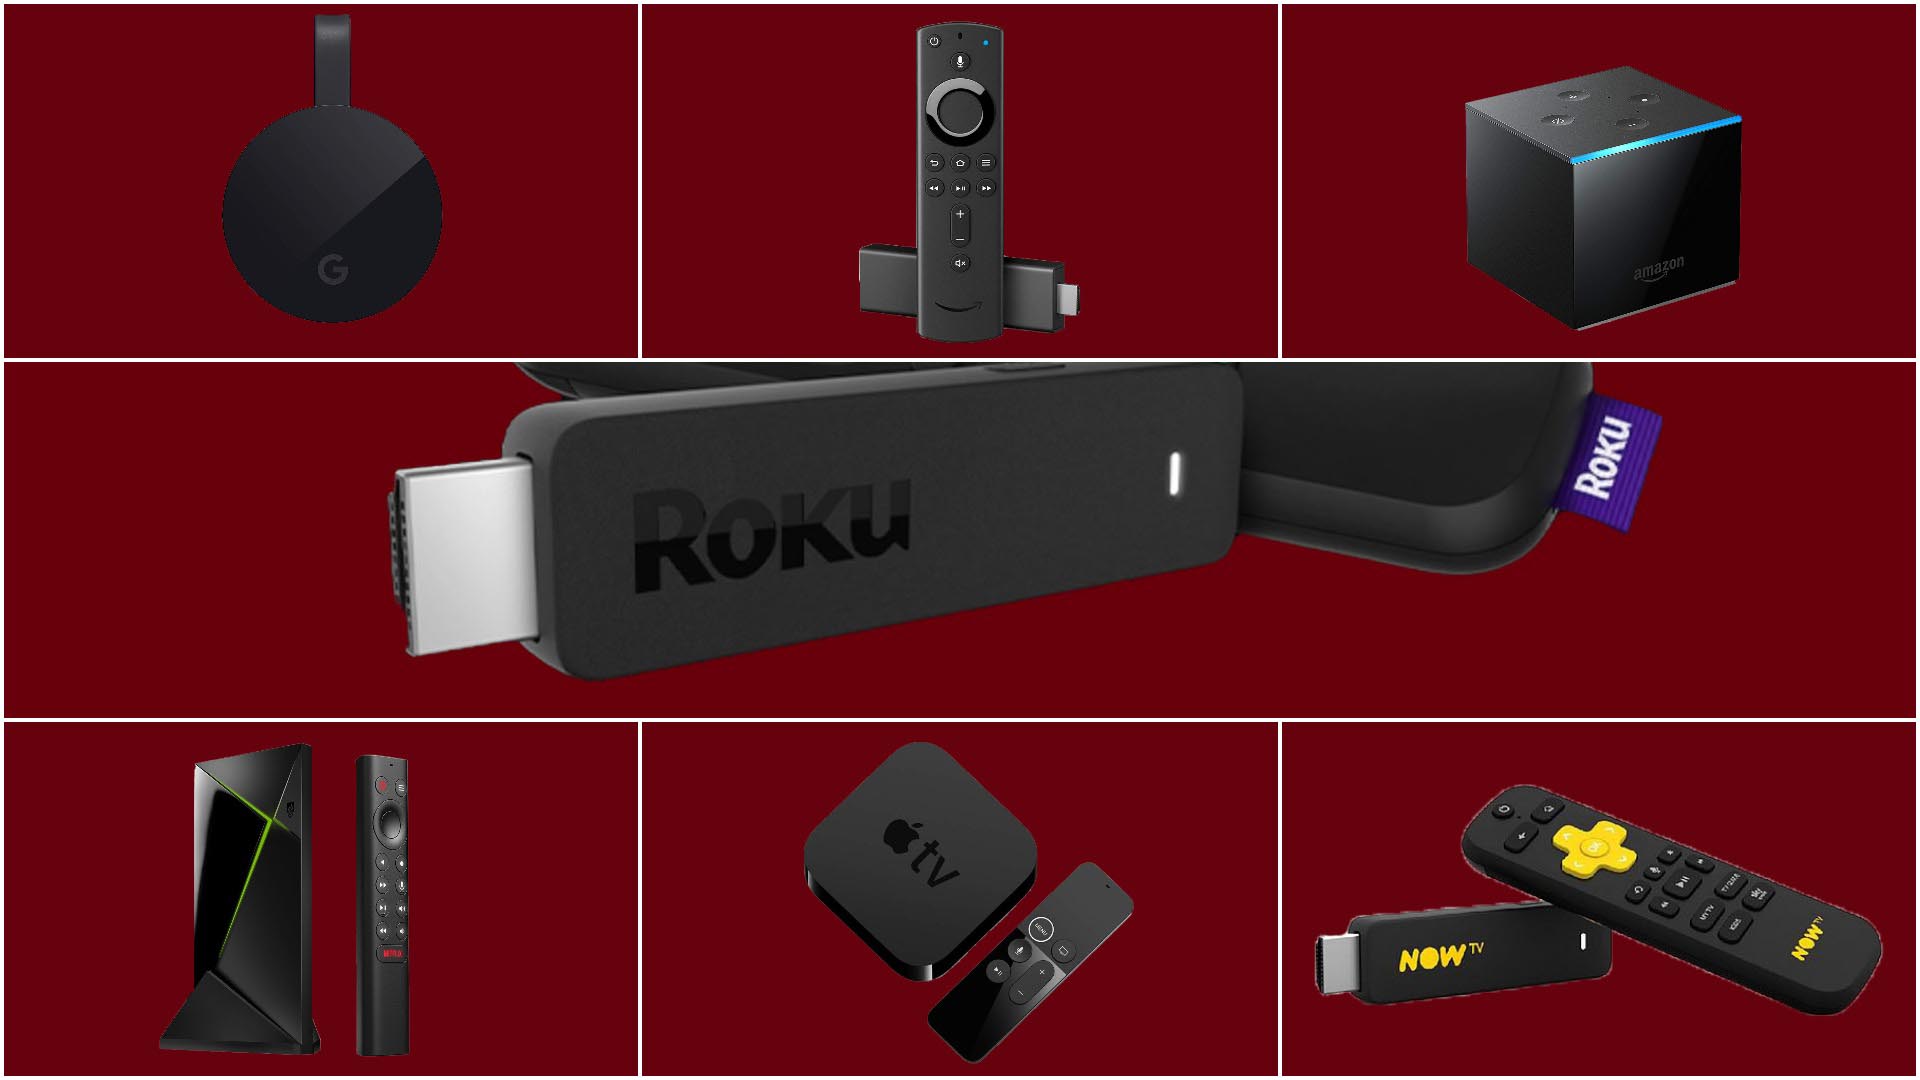 The best TV streaming devices for watching Netflix, , and iPlayer